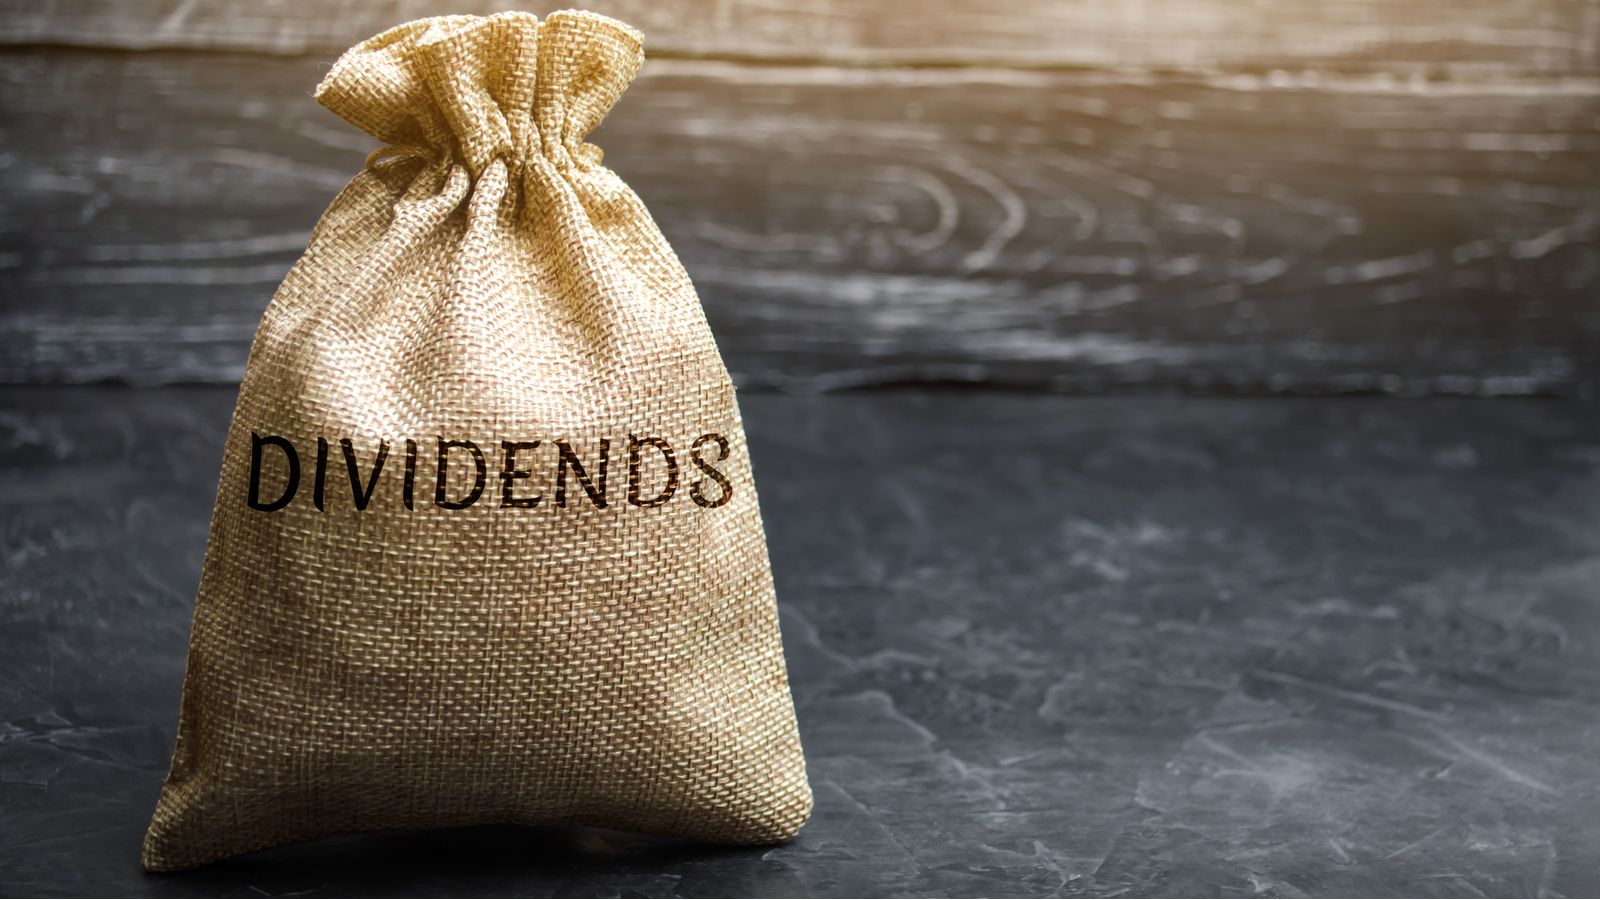 a bag on a table with the word "dividends" on it. represent dividend stocks to buy